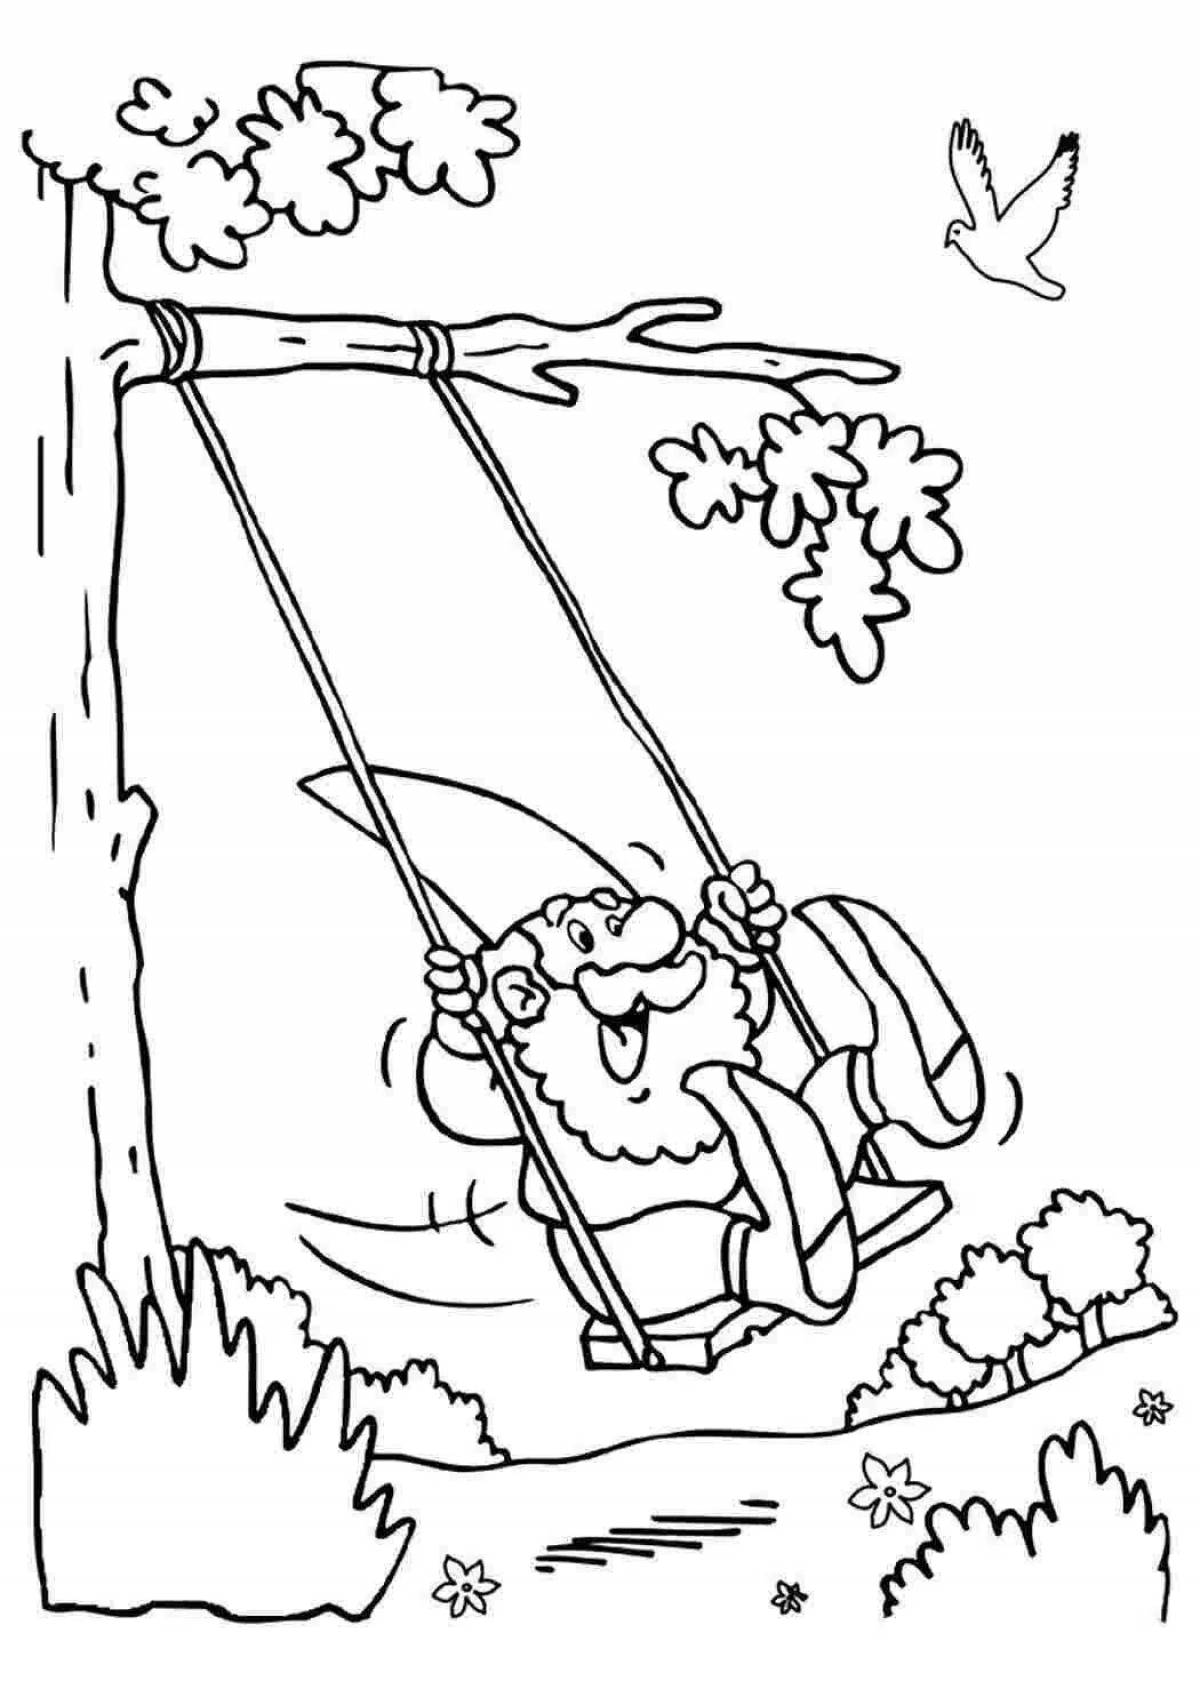 Living girl on a swing coloring book